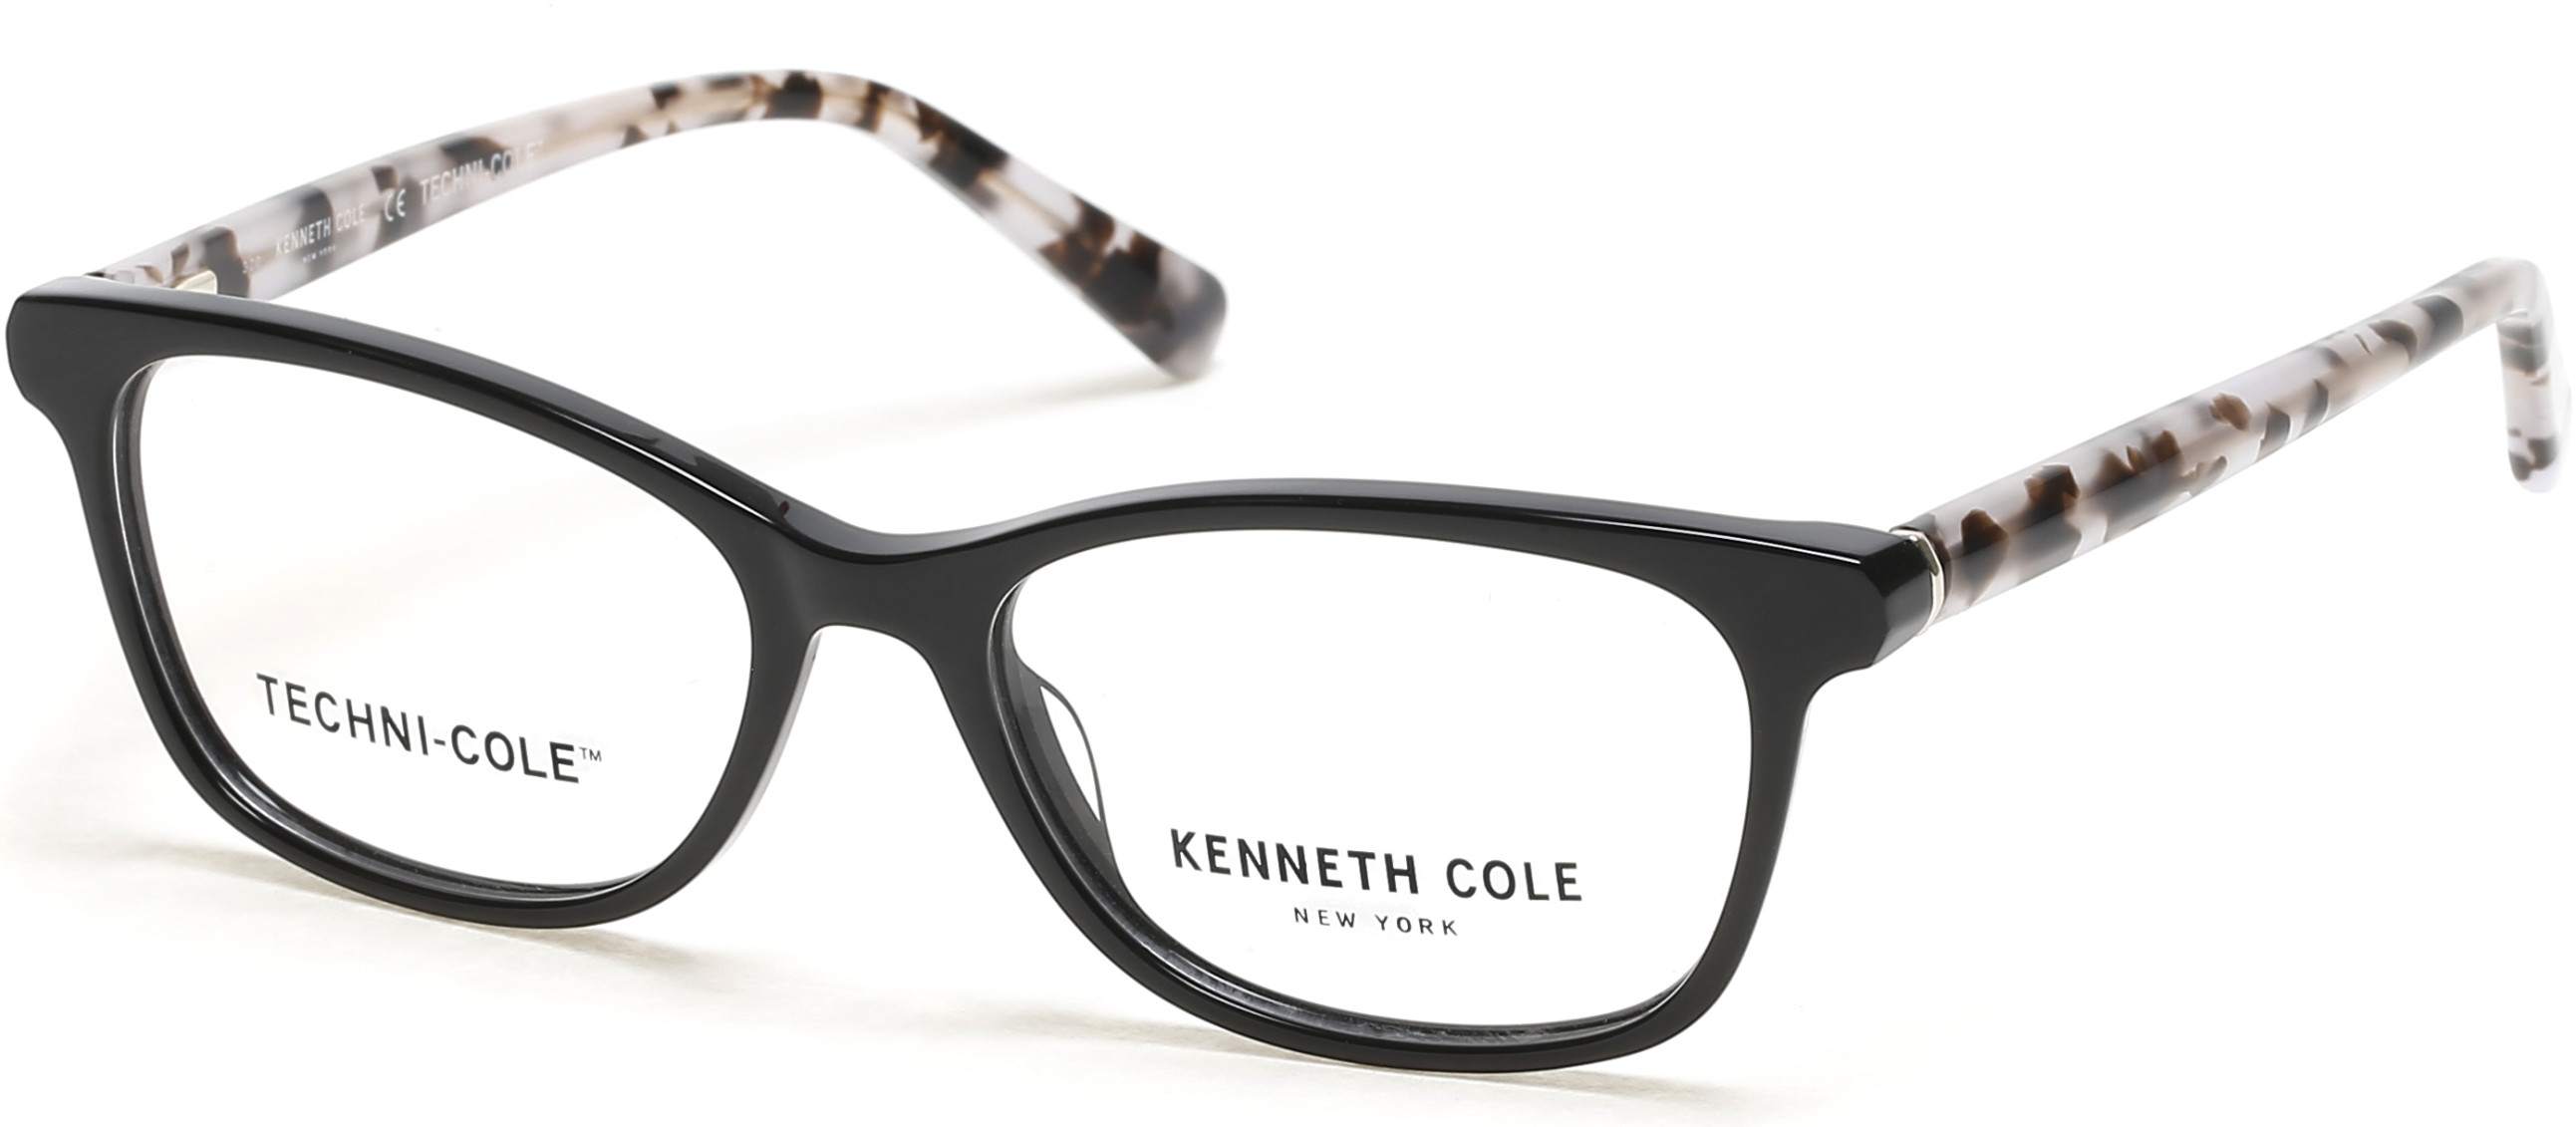 KENNETH COLE NY 0326